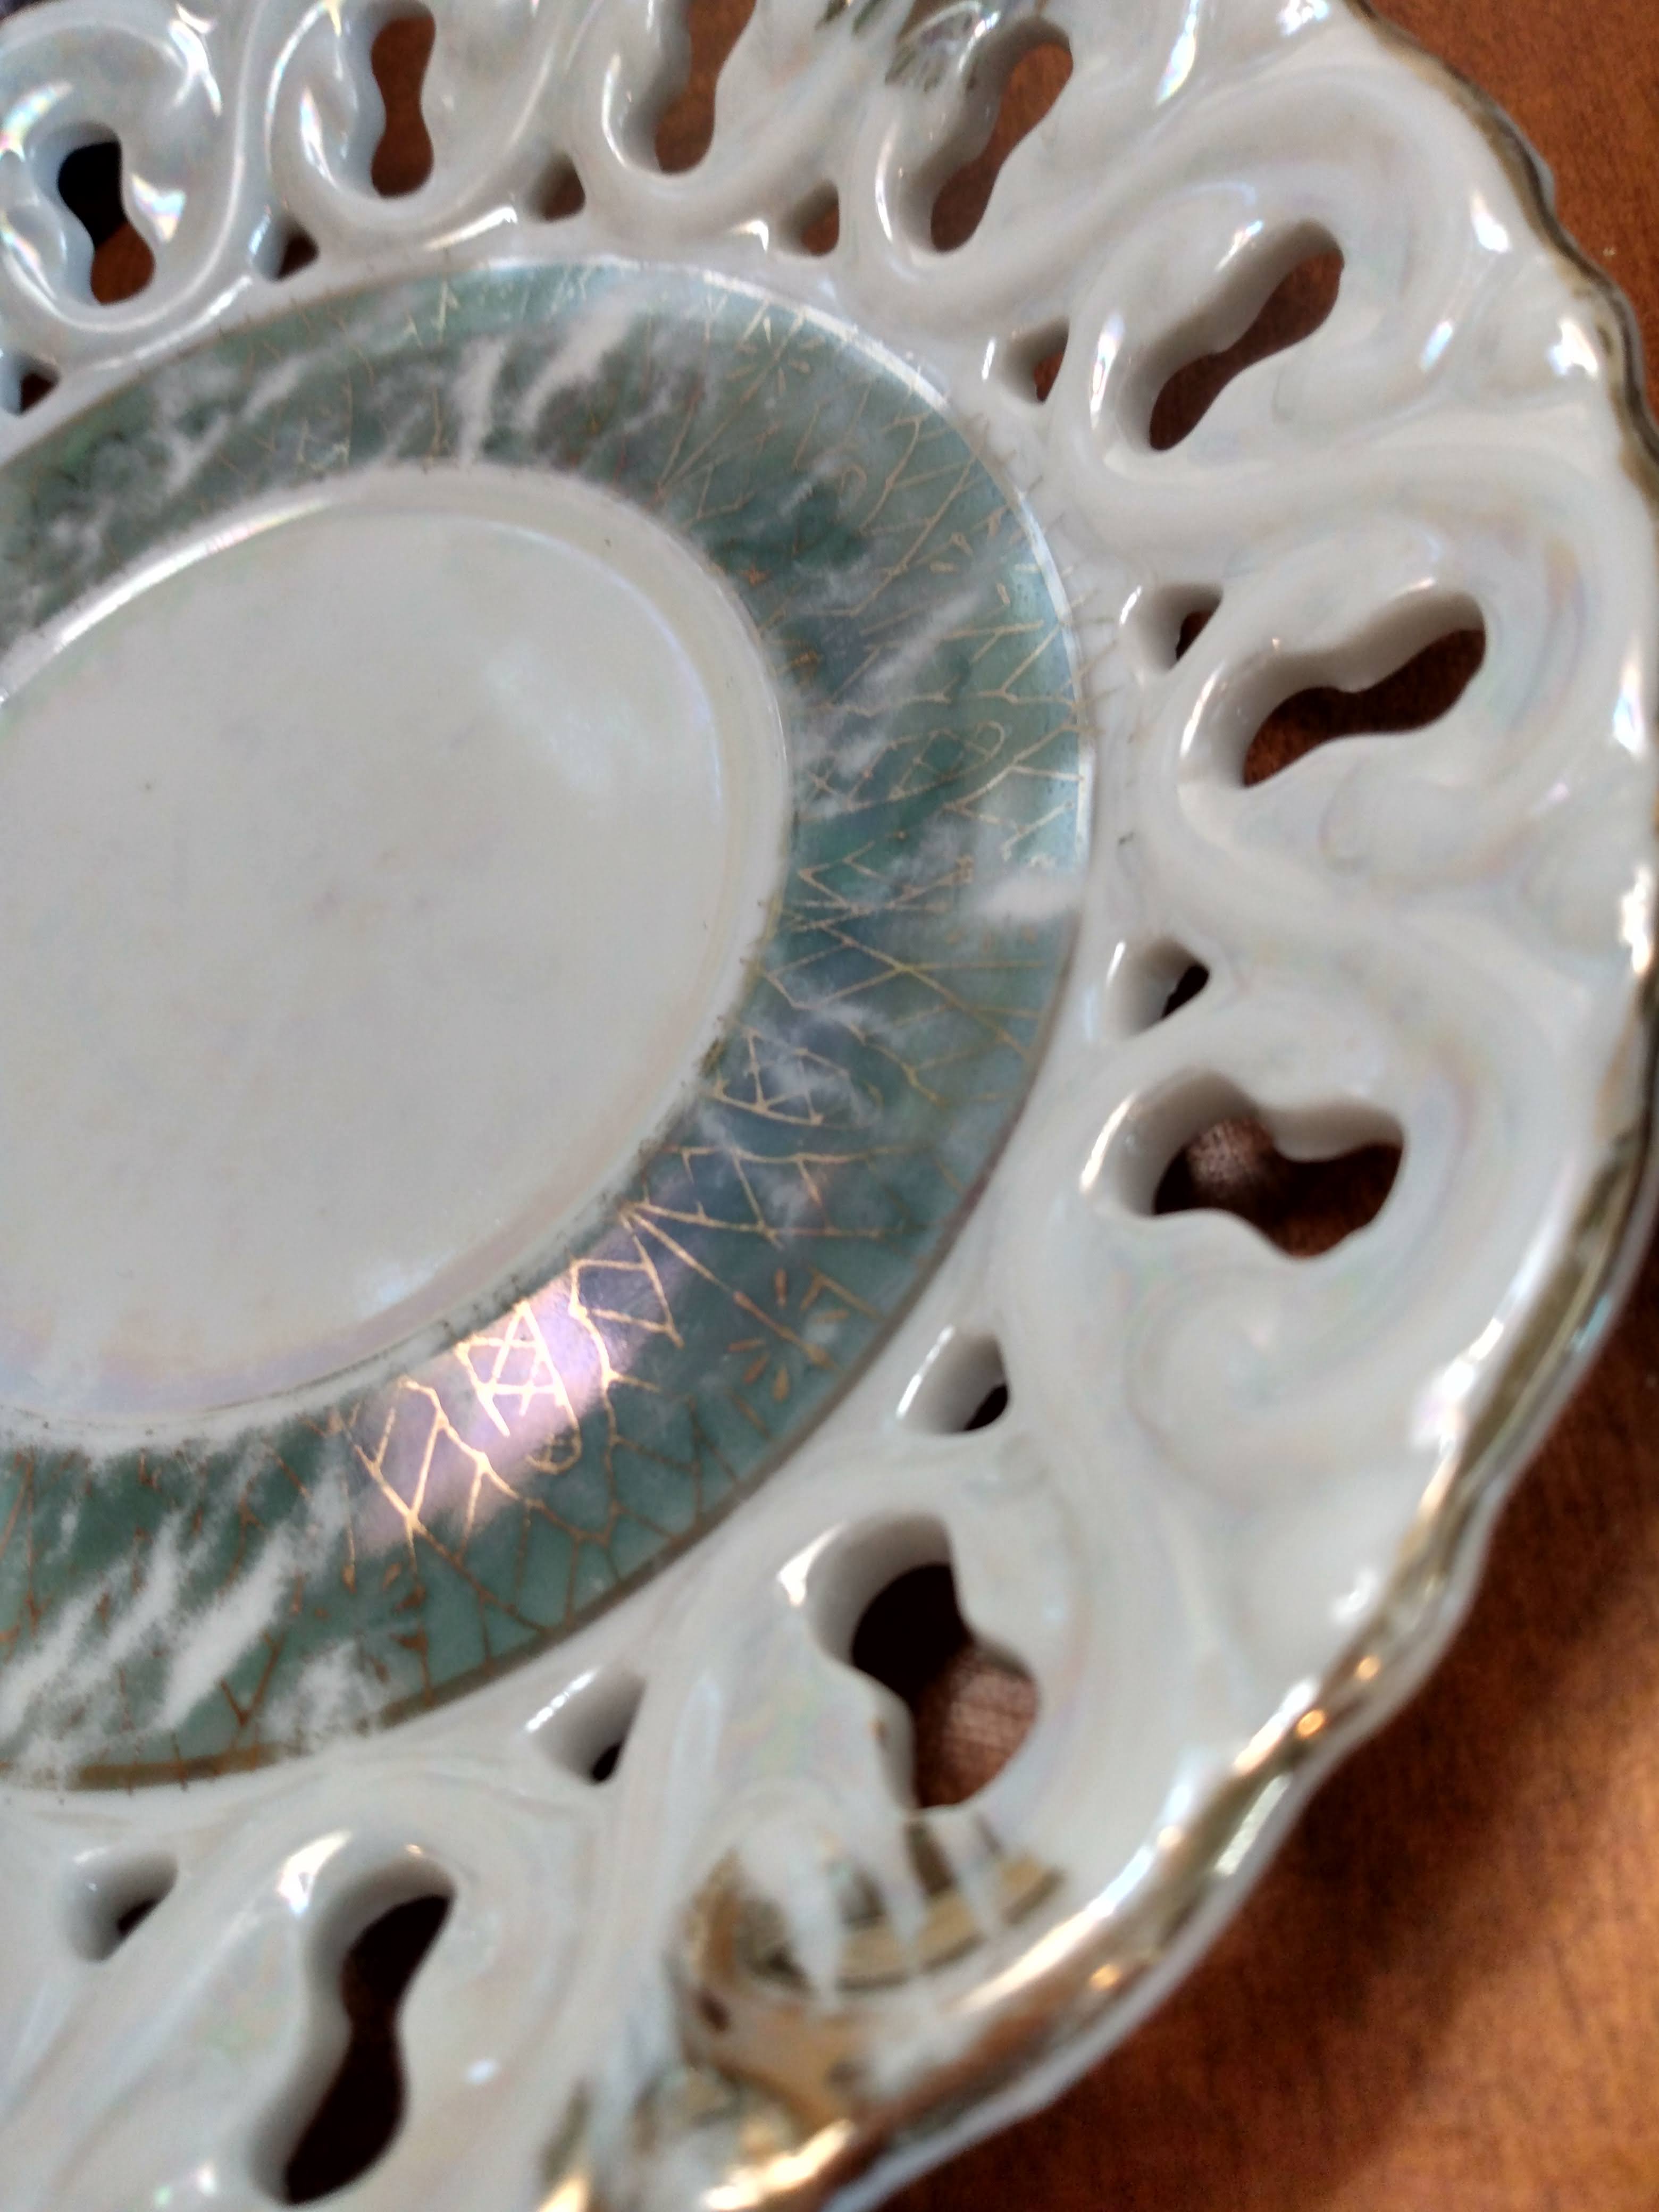 Moonstone Pearl Color - Porcelain Fine China Collectible - Authentic Vintage Rare - Gold Green Pattern- Japanese Plate - Home Decor